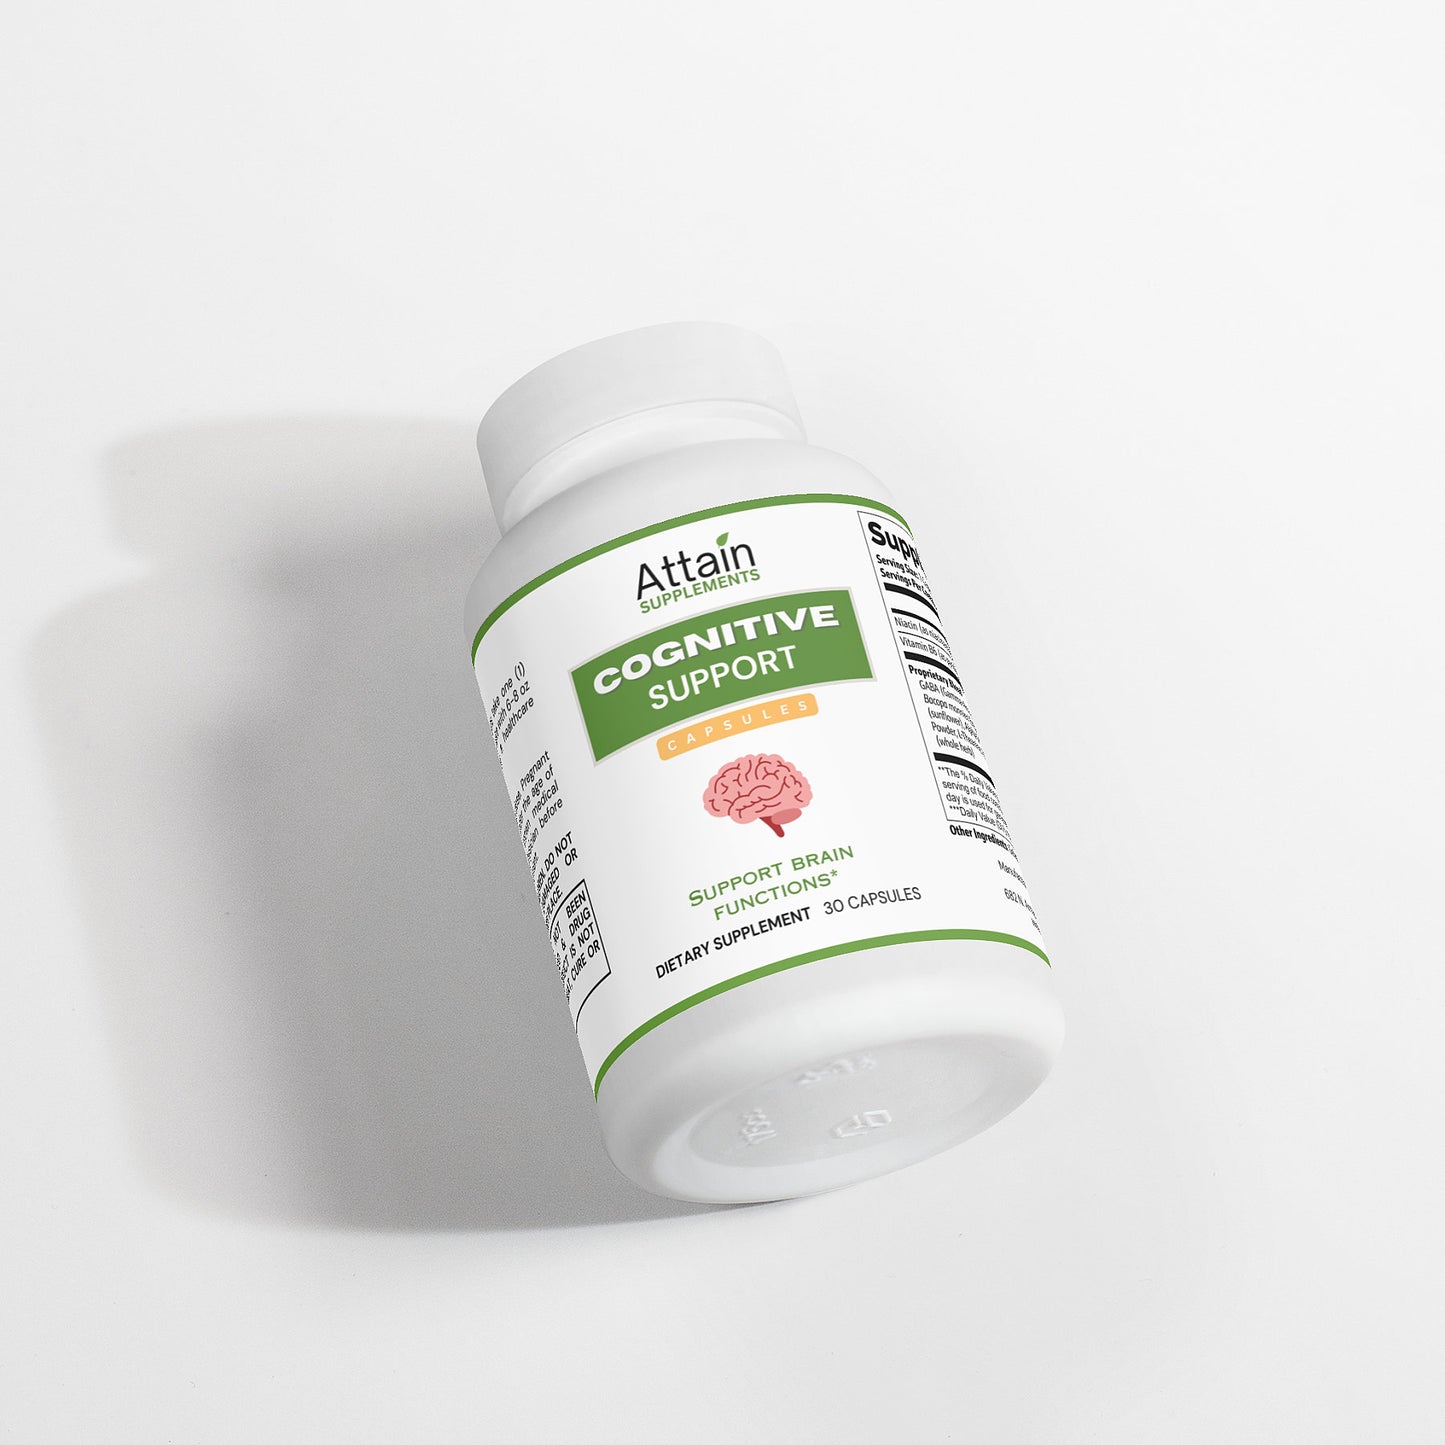 Cognitive Support - Attain Supplements